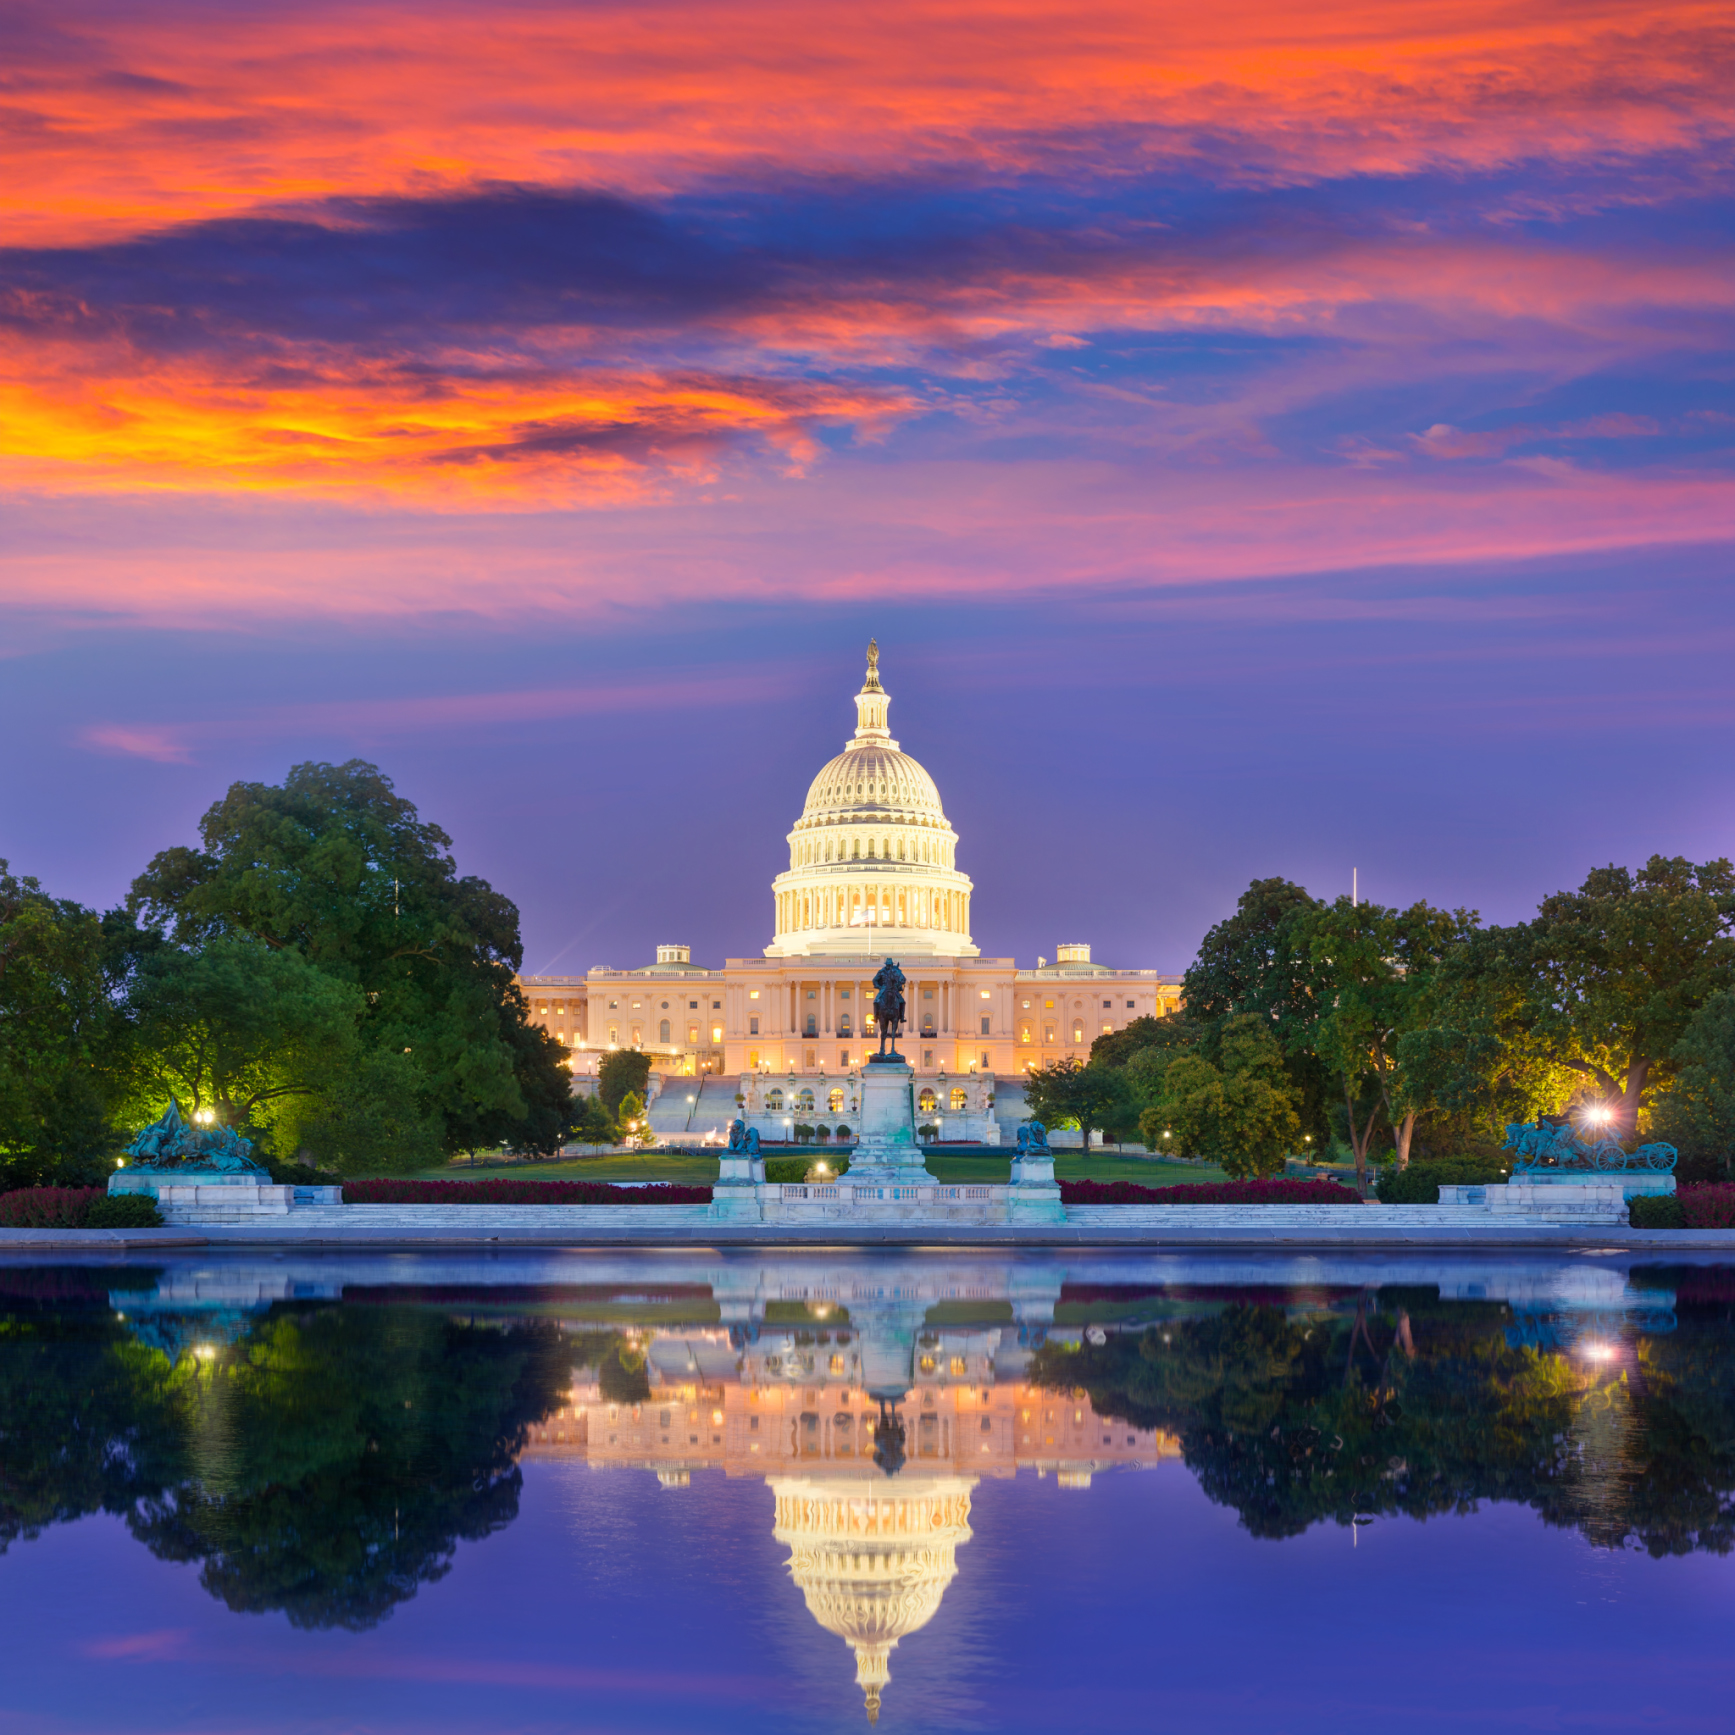 must see places to visit in washington dc